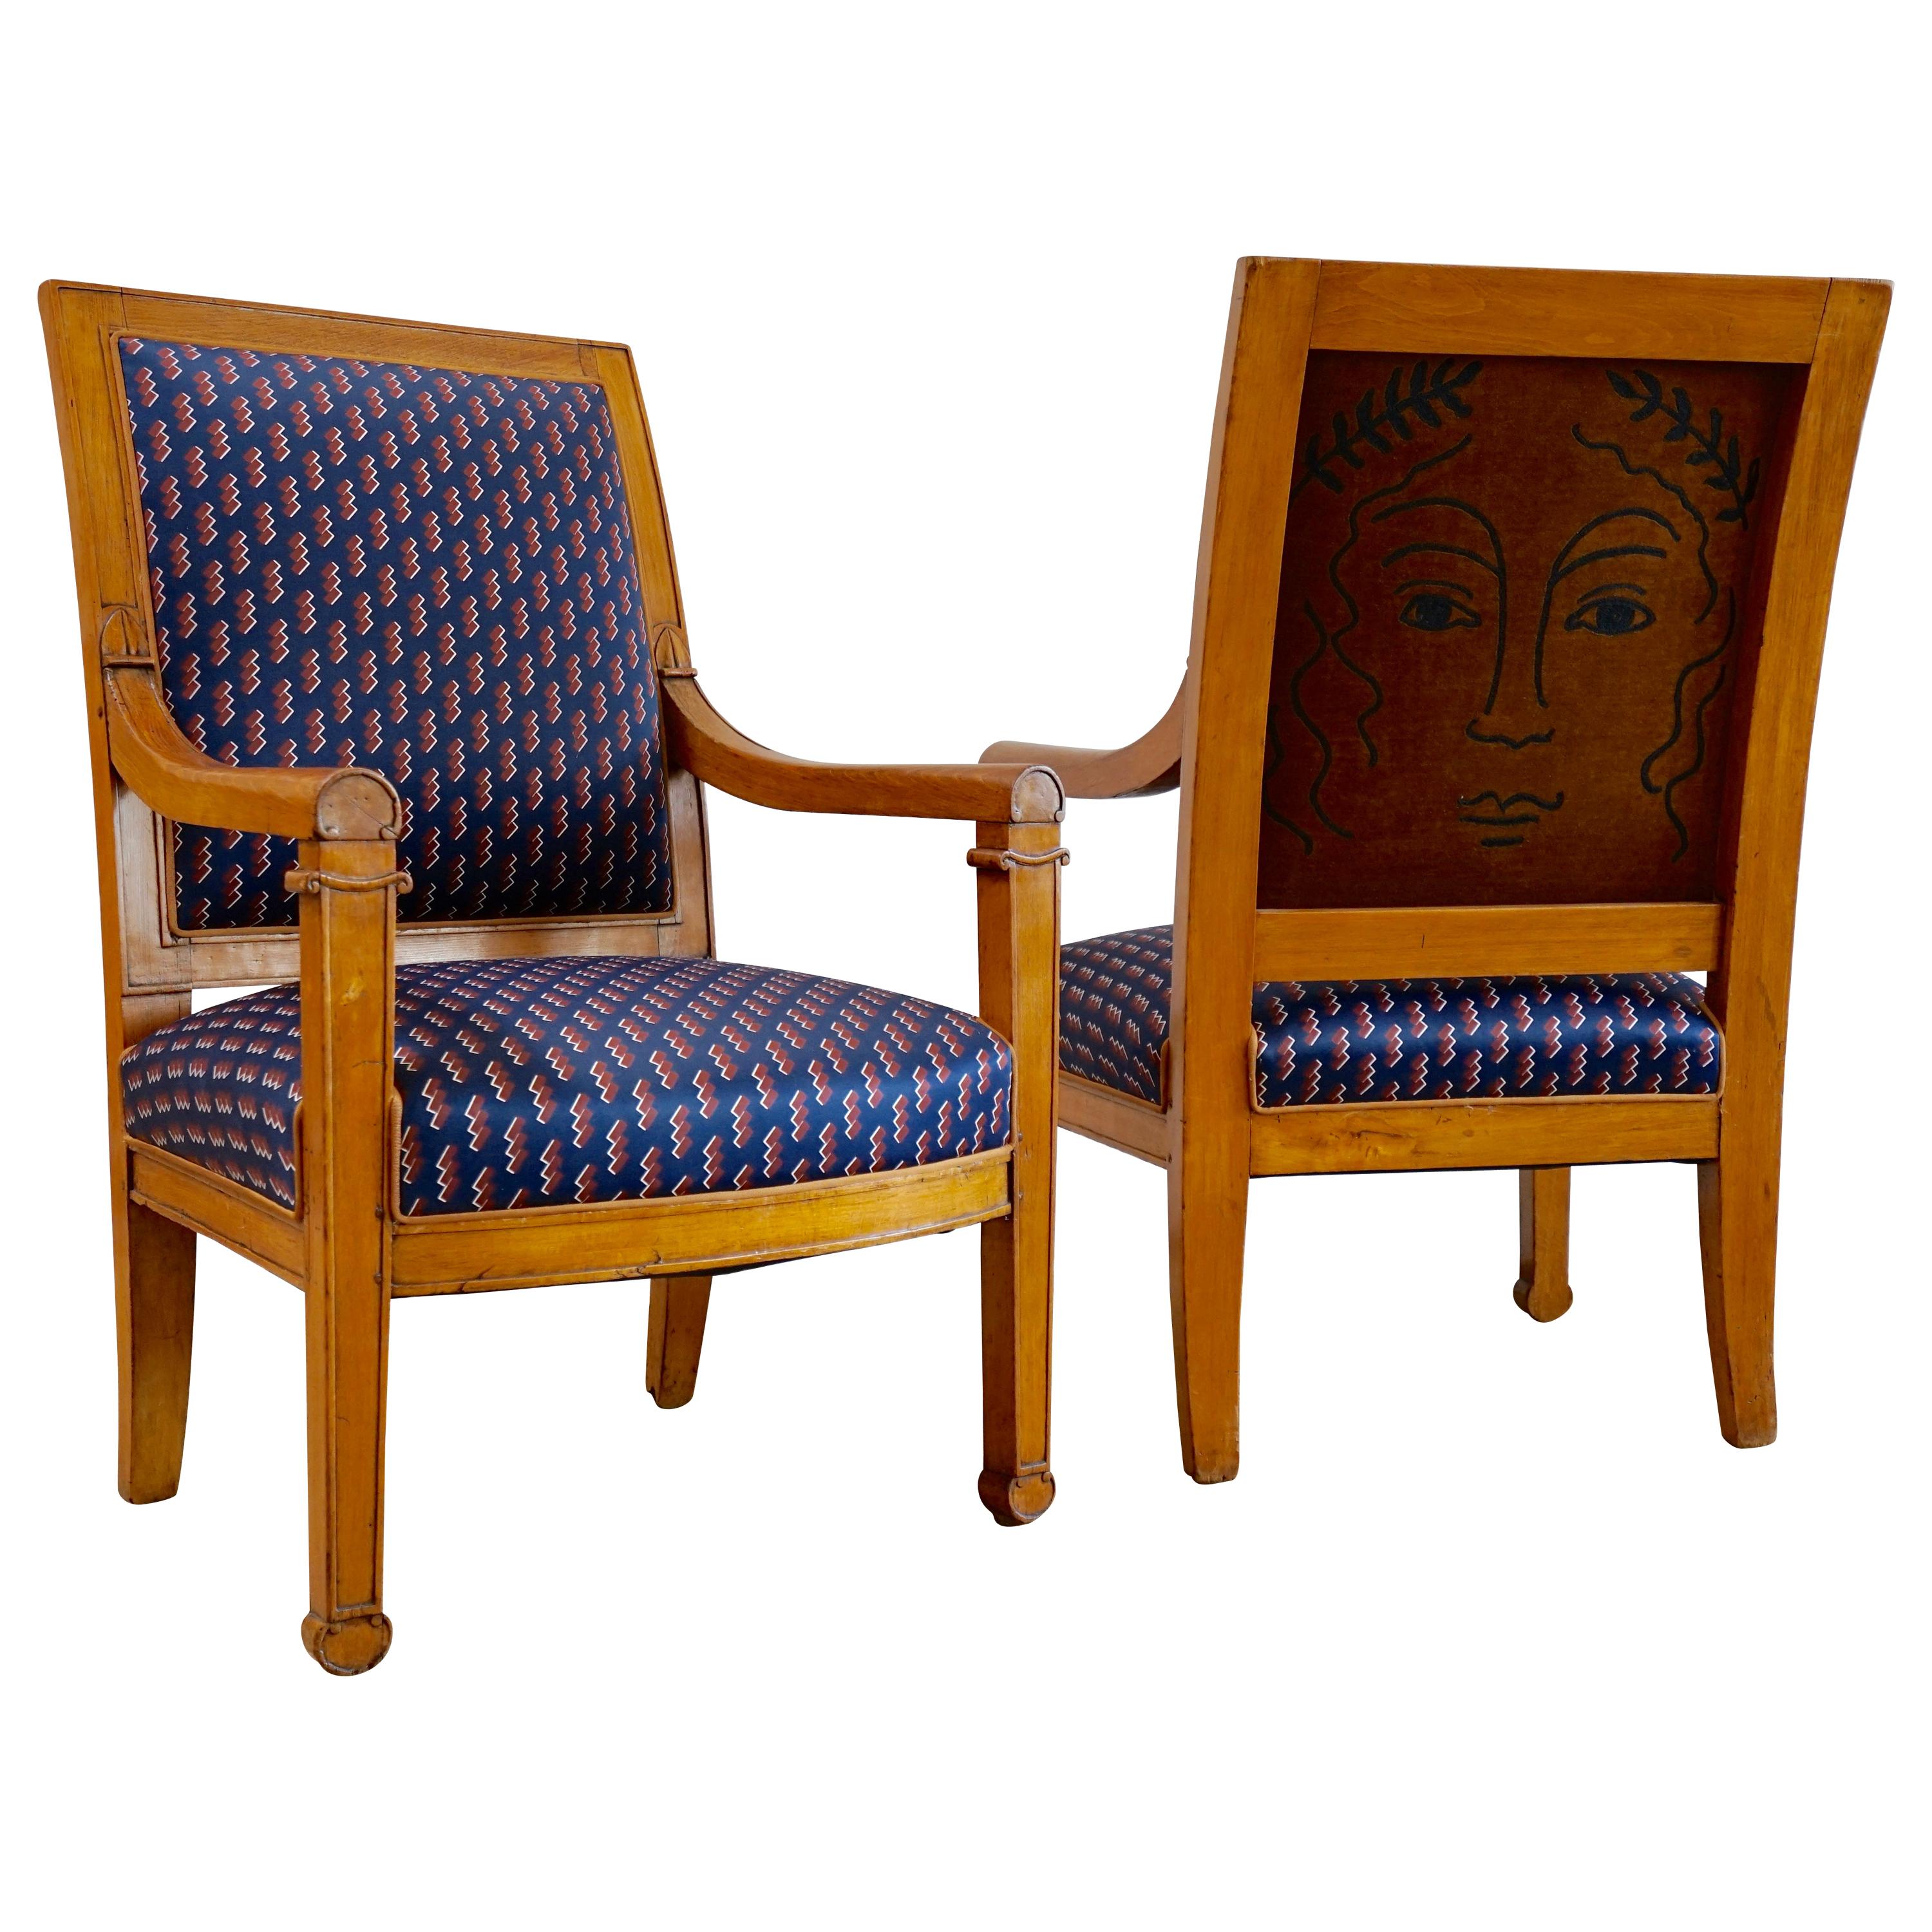 Embroidery by RF. Alvarez on Pair of Louis Philippe Armchairs, Navy and Bronze